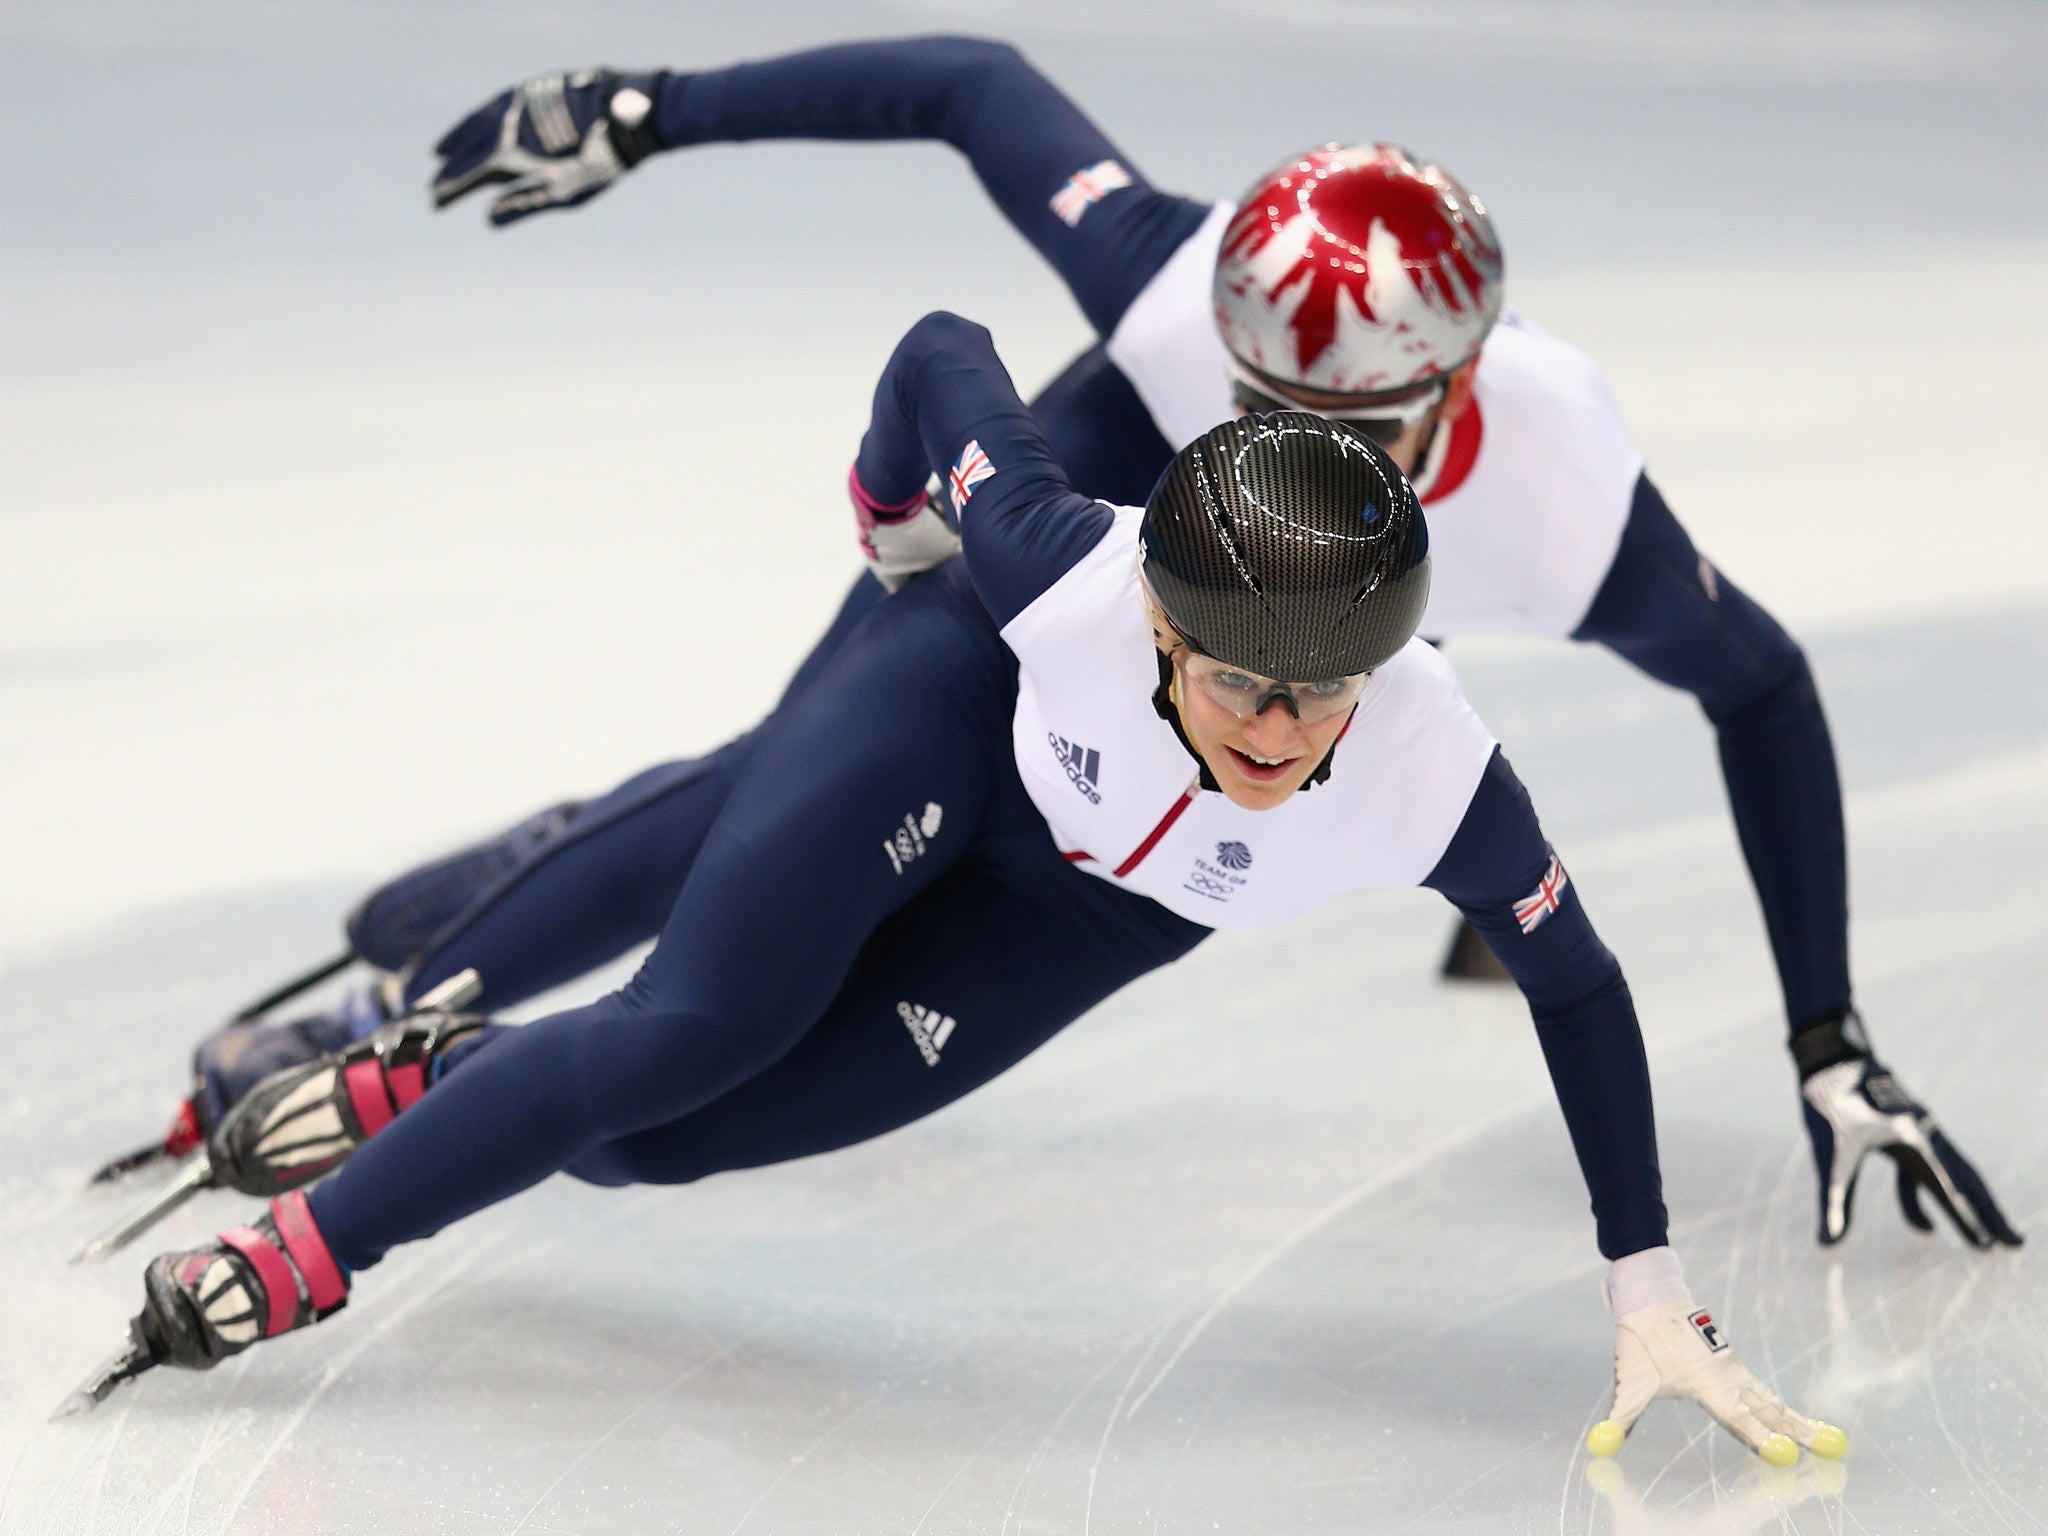 Elise Christie typically makes the running in her speed-skating events, but will vary her tactics if needed in Sochi